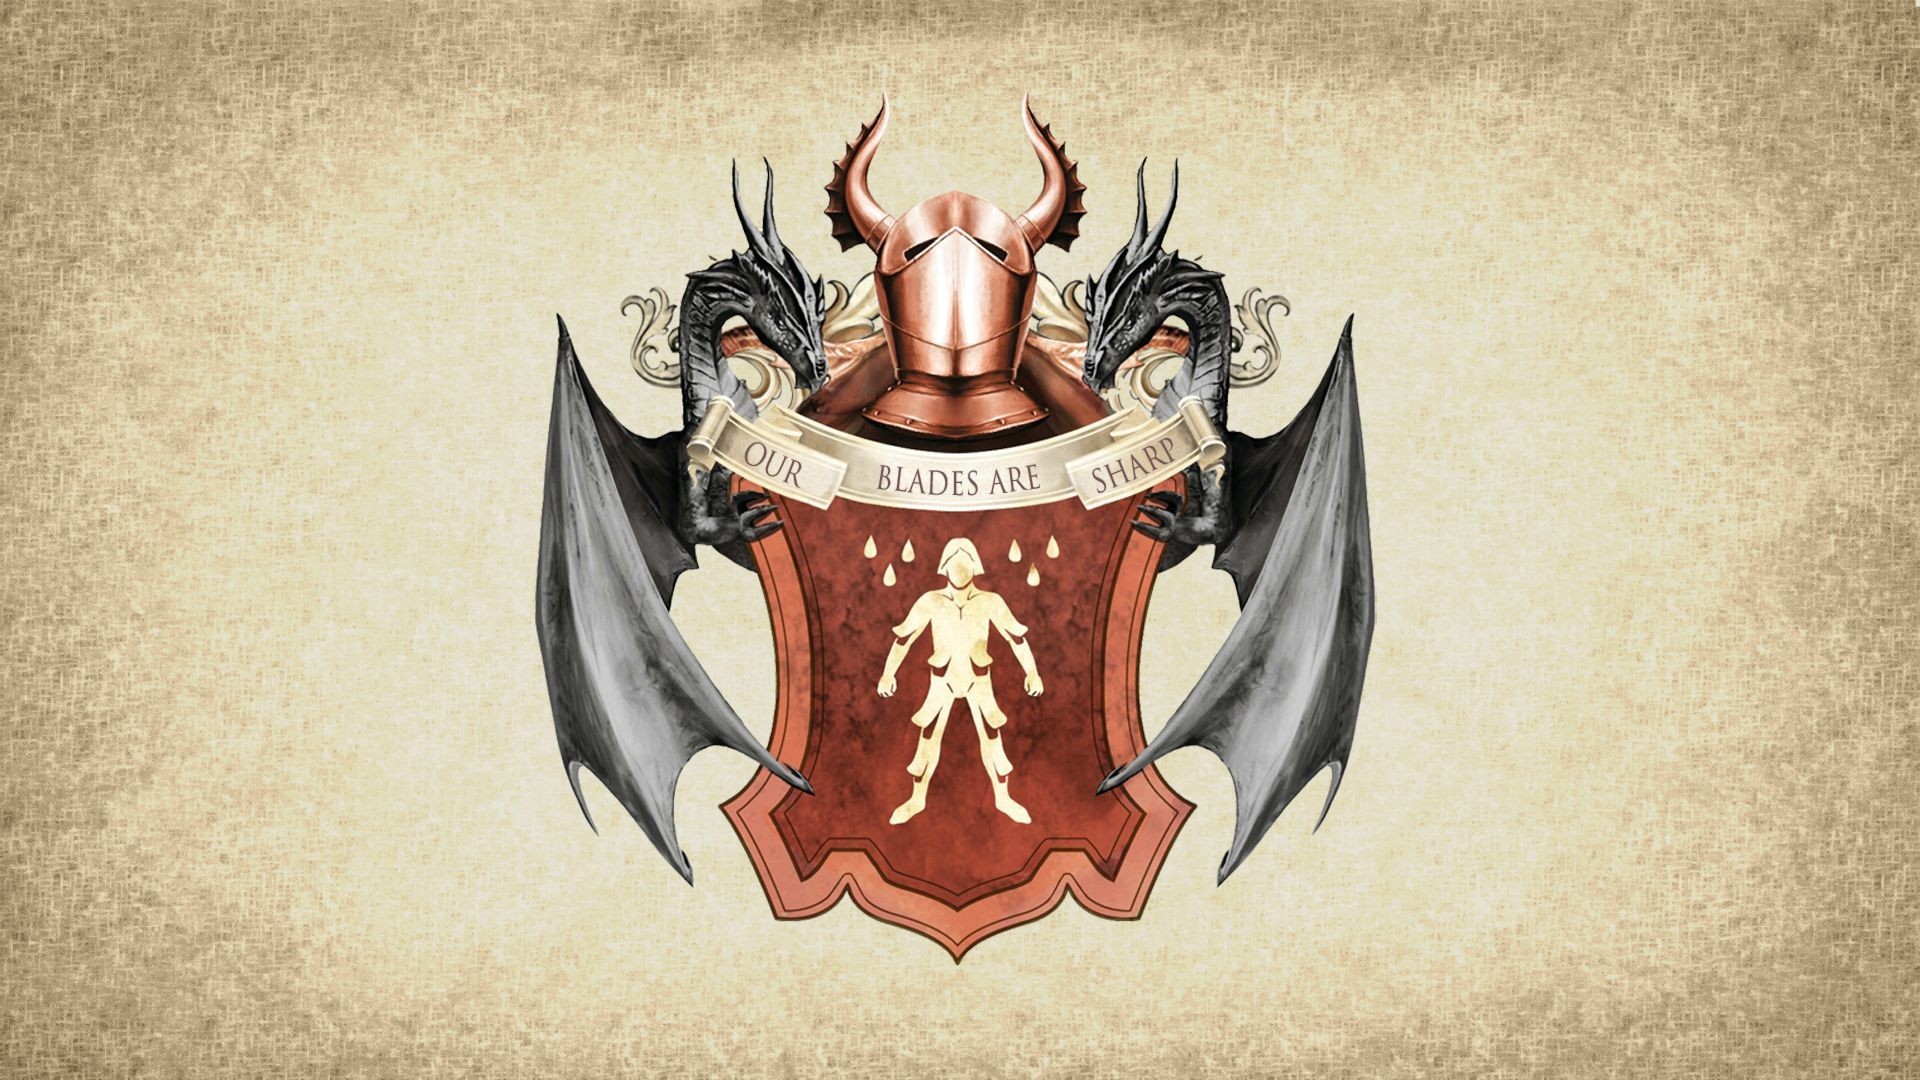 Game Of Thrones, Artwork, Paper, Bolton, Coats Of Arms, Sigils Wallpaper